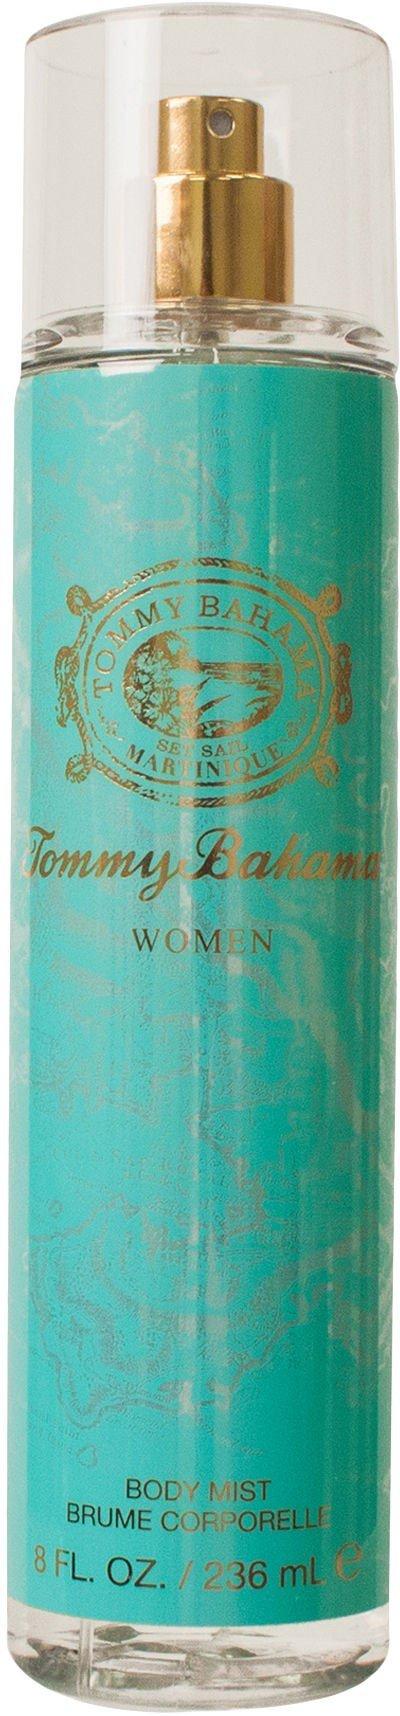 tommy bahama martinique women's